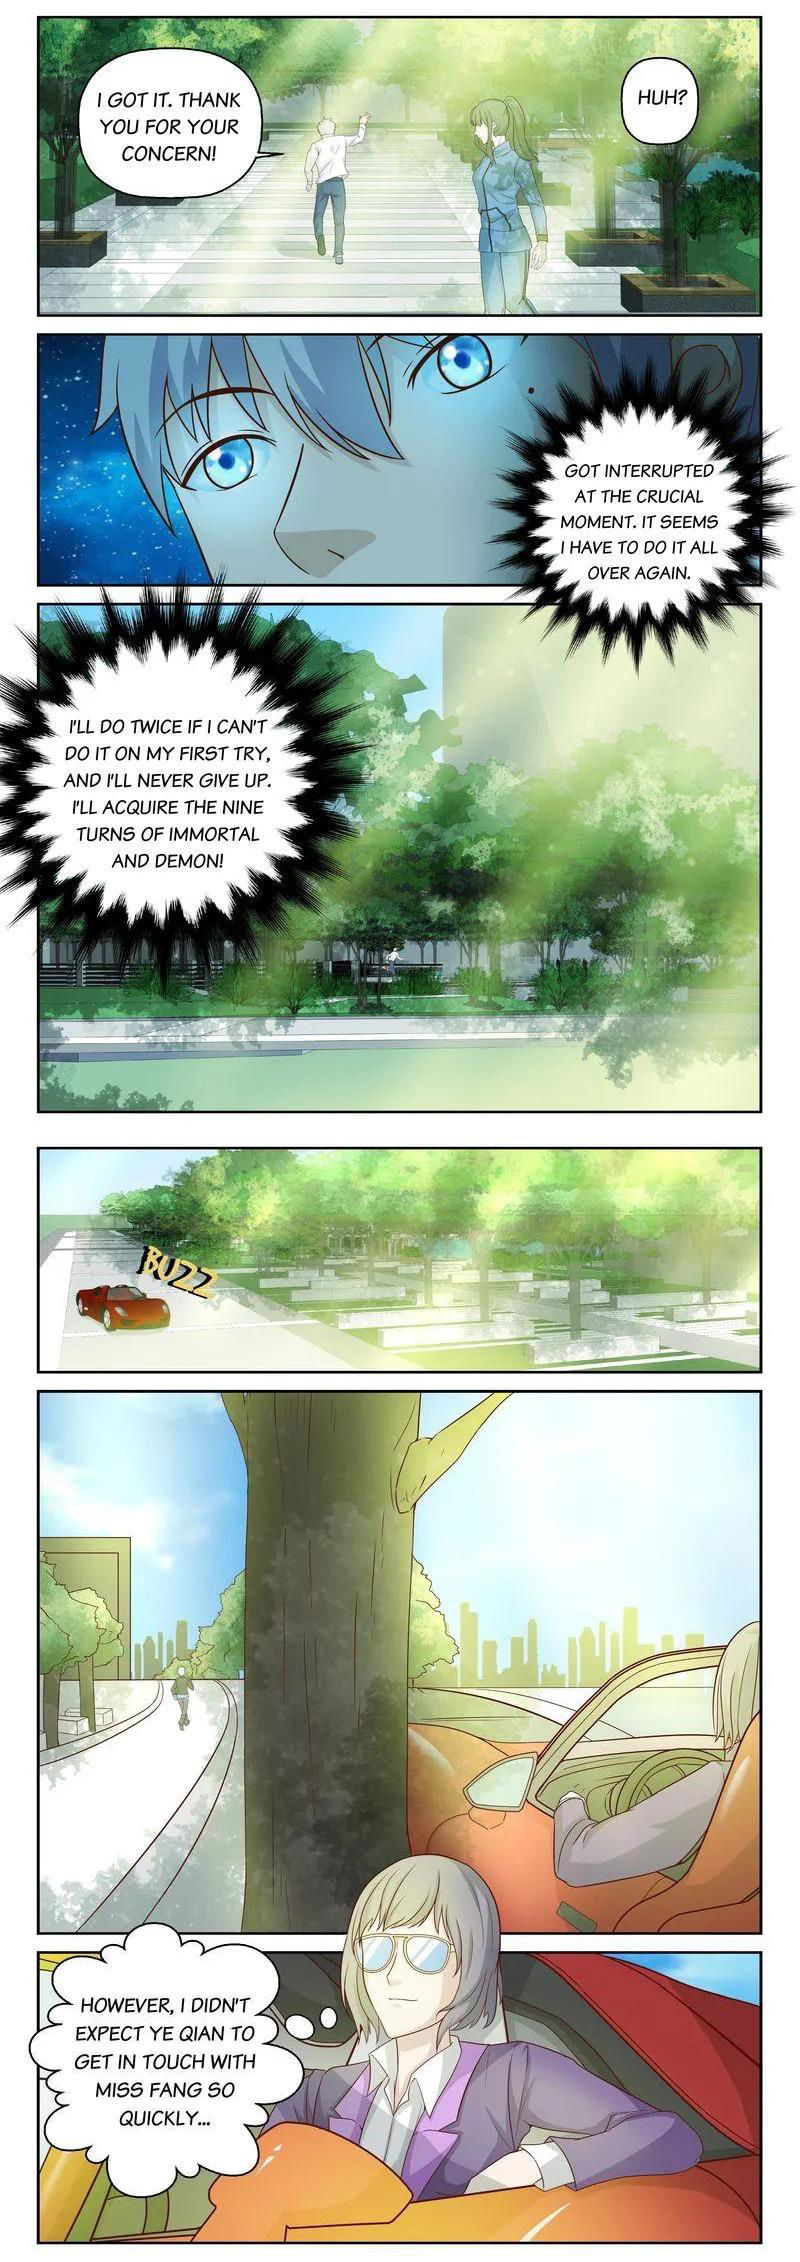 Cultivating With An Immortal's Memory Chapter 21 page 4